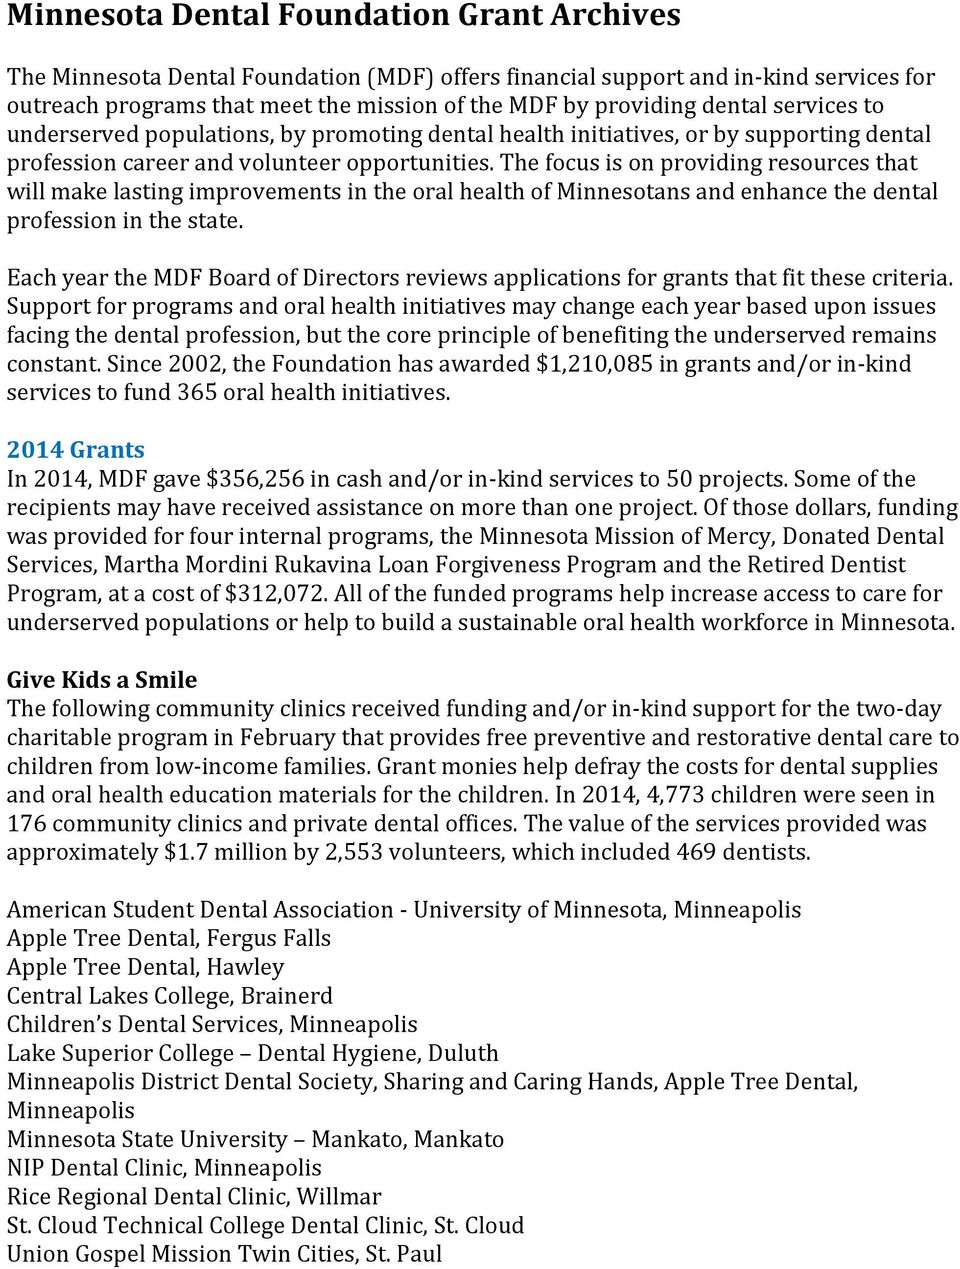 The focus is on providing resources that will make lasting improvements in the oral health of Minnesotans and enhance the dental profession in the state.